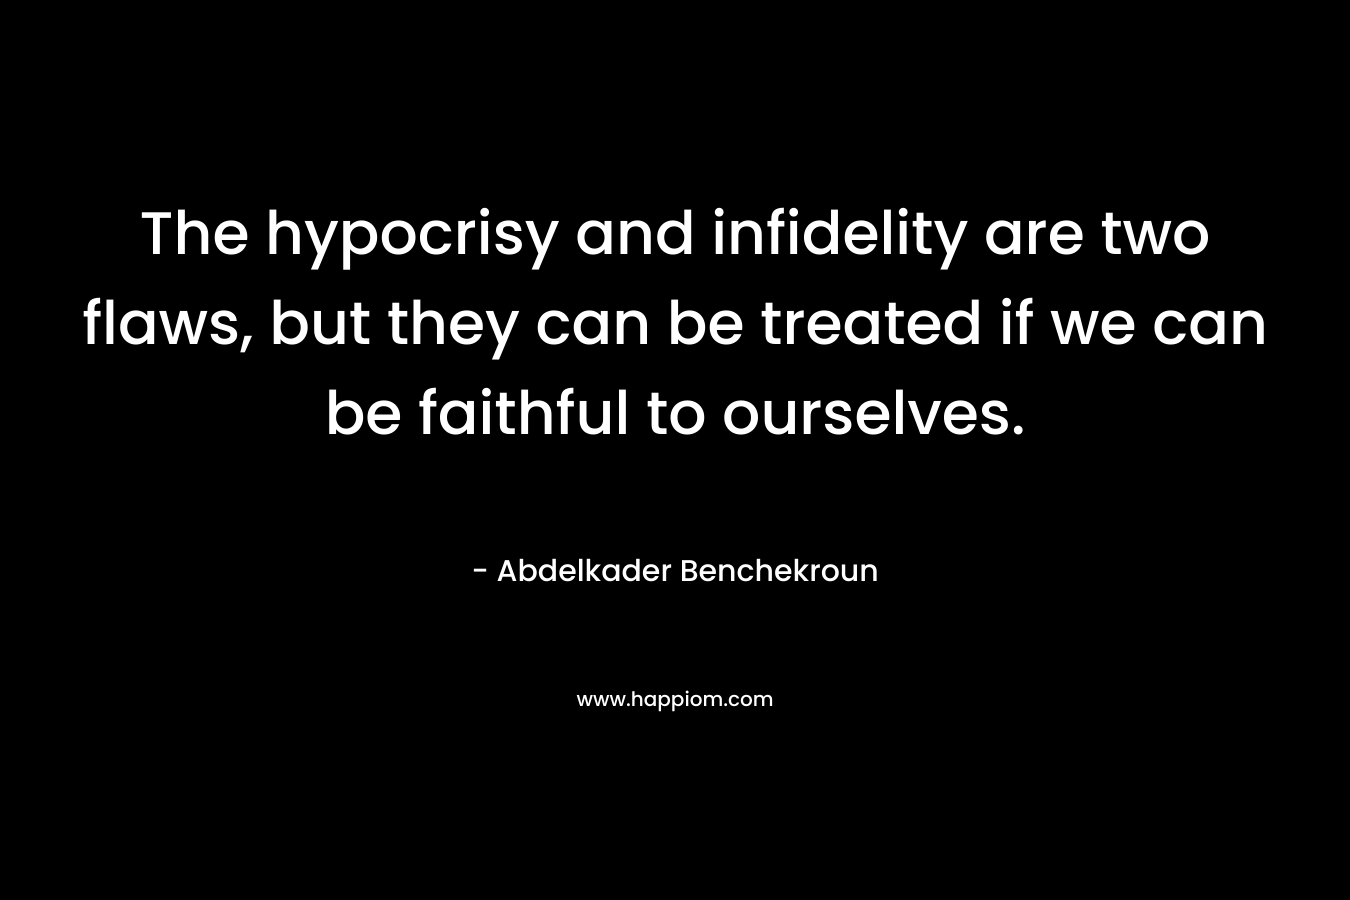 The hypocrisy and infidelity are two flaws, but they can be treated if we can be faithful to ourselves. – Abdelkader Benchekroun